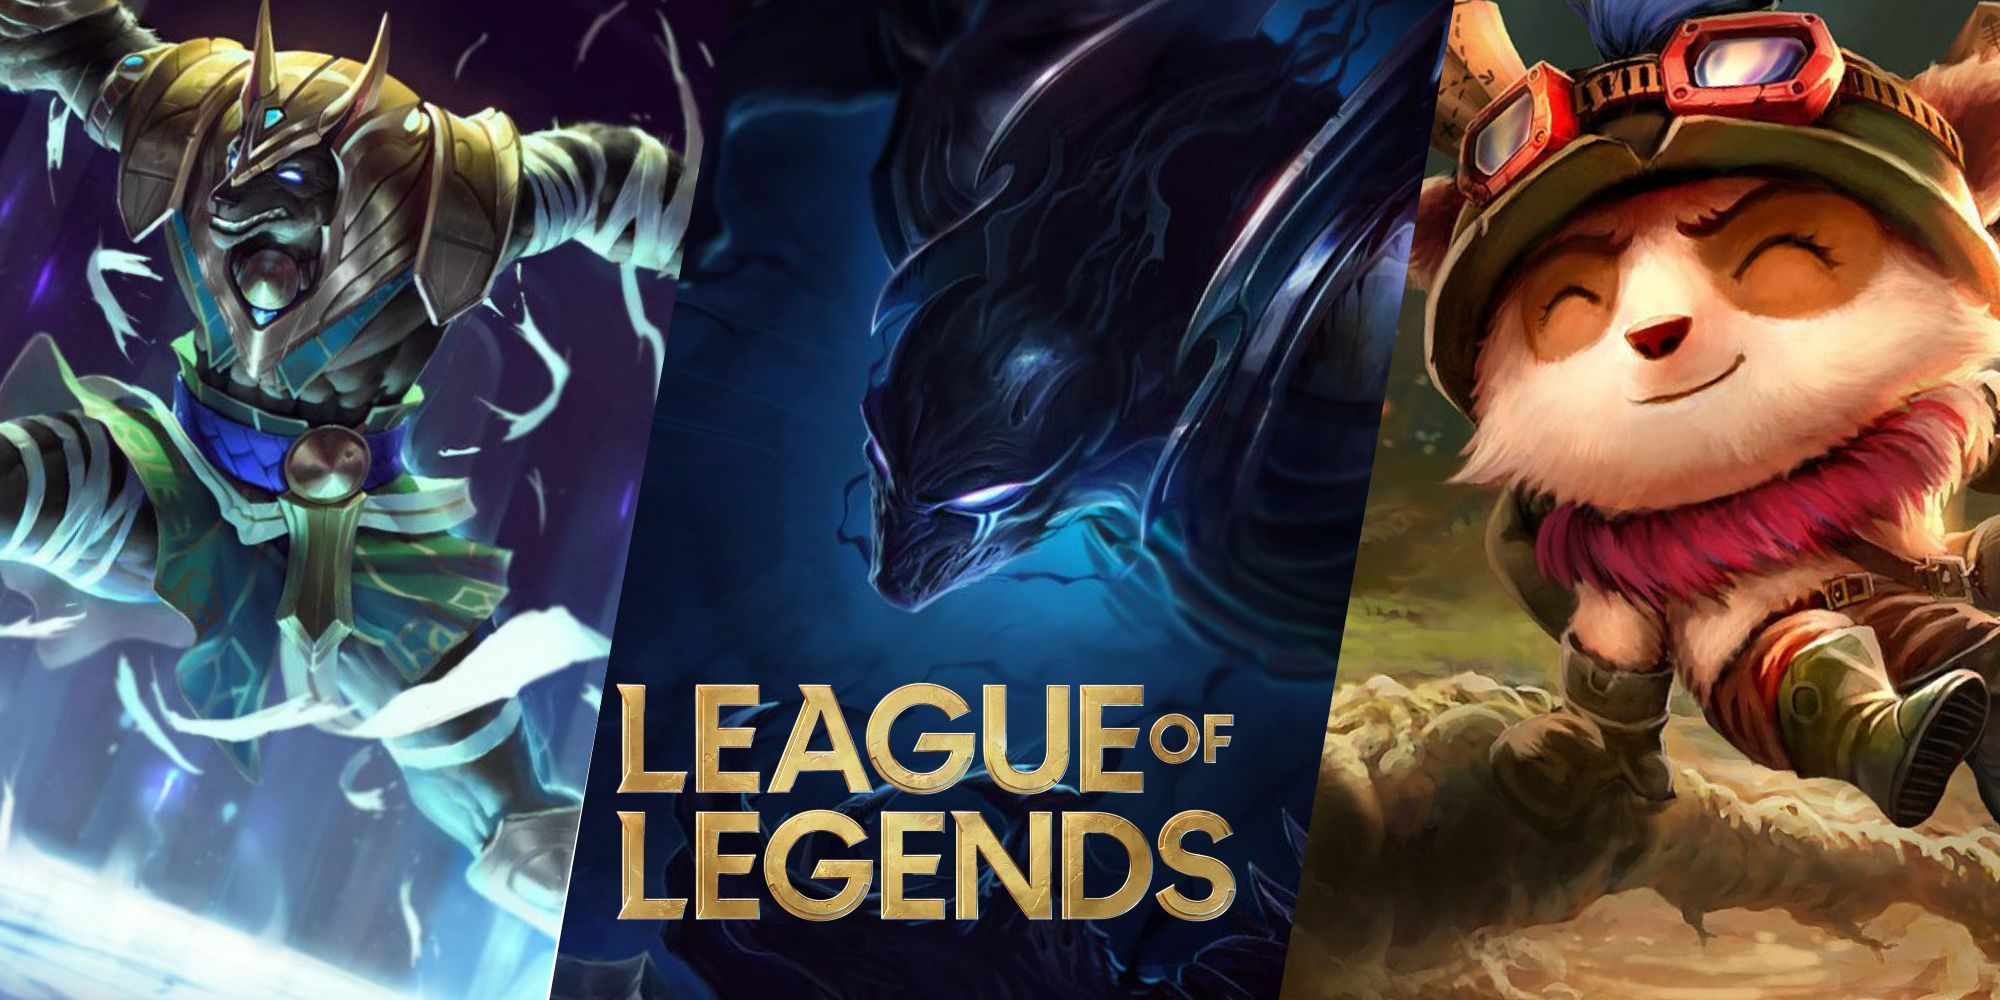 Champions That Really Need A Rework In League Of Legends- Nasus, Nocturne and Teemo